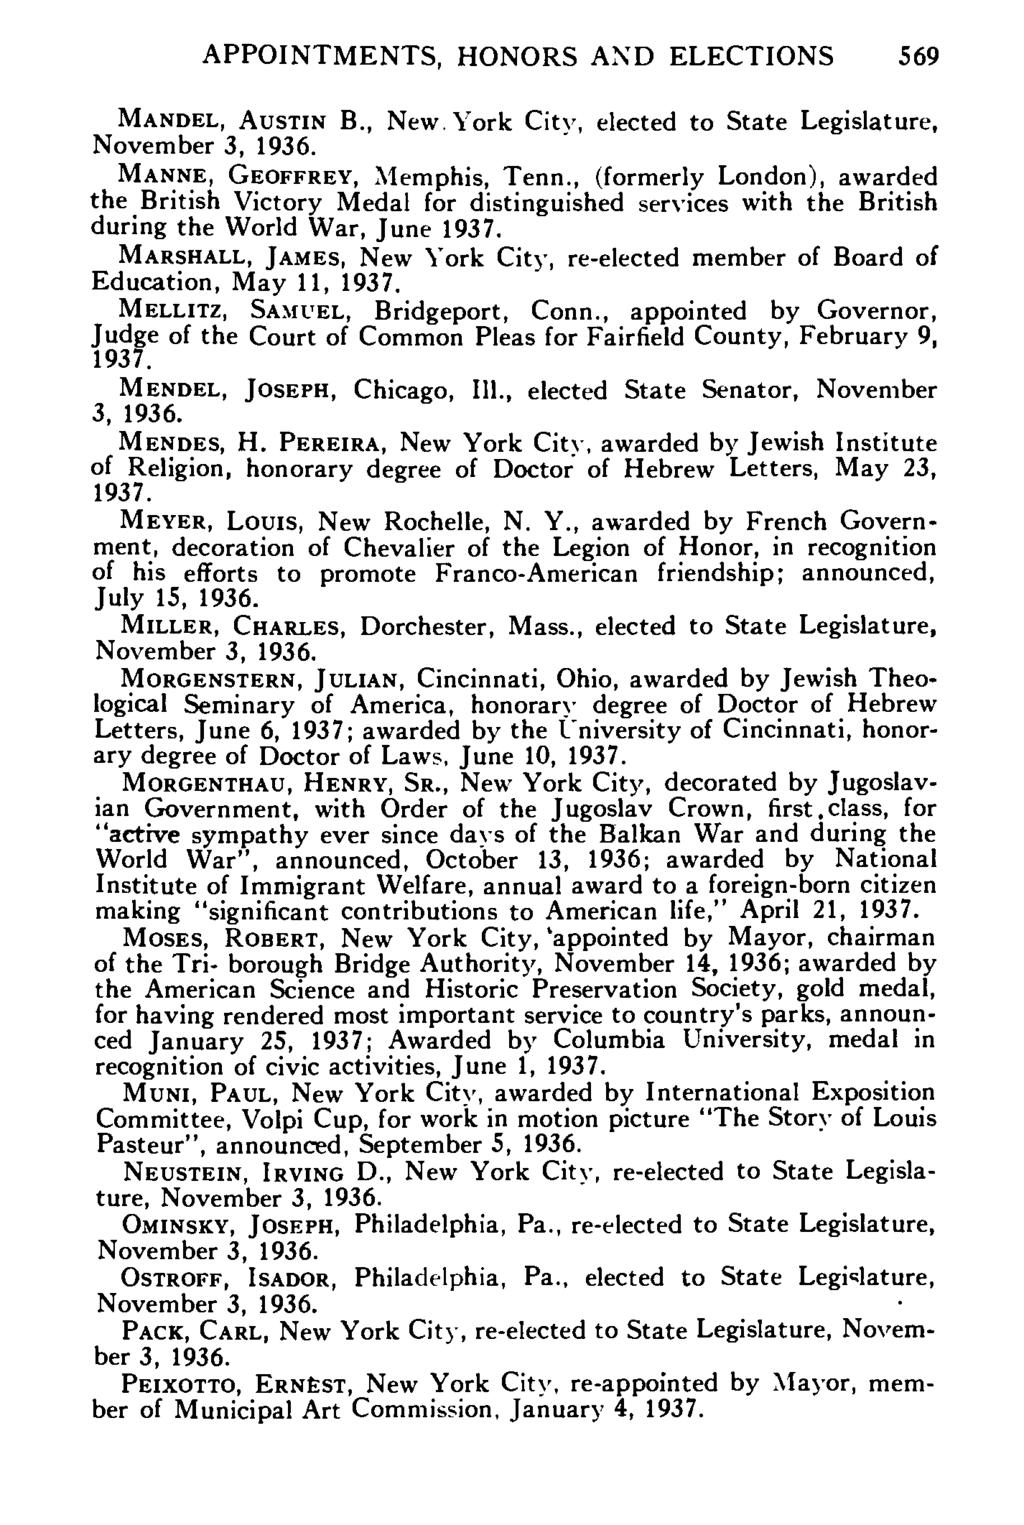 APPOINTMENTS, HONORS AND ELECTIONS 569 MANDEL, AUSTIN B., New. York City, elected to State Legislature, MANNE, GEOFFREY, Memphis, Tenn.